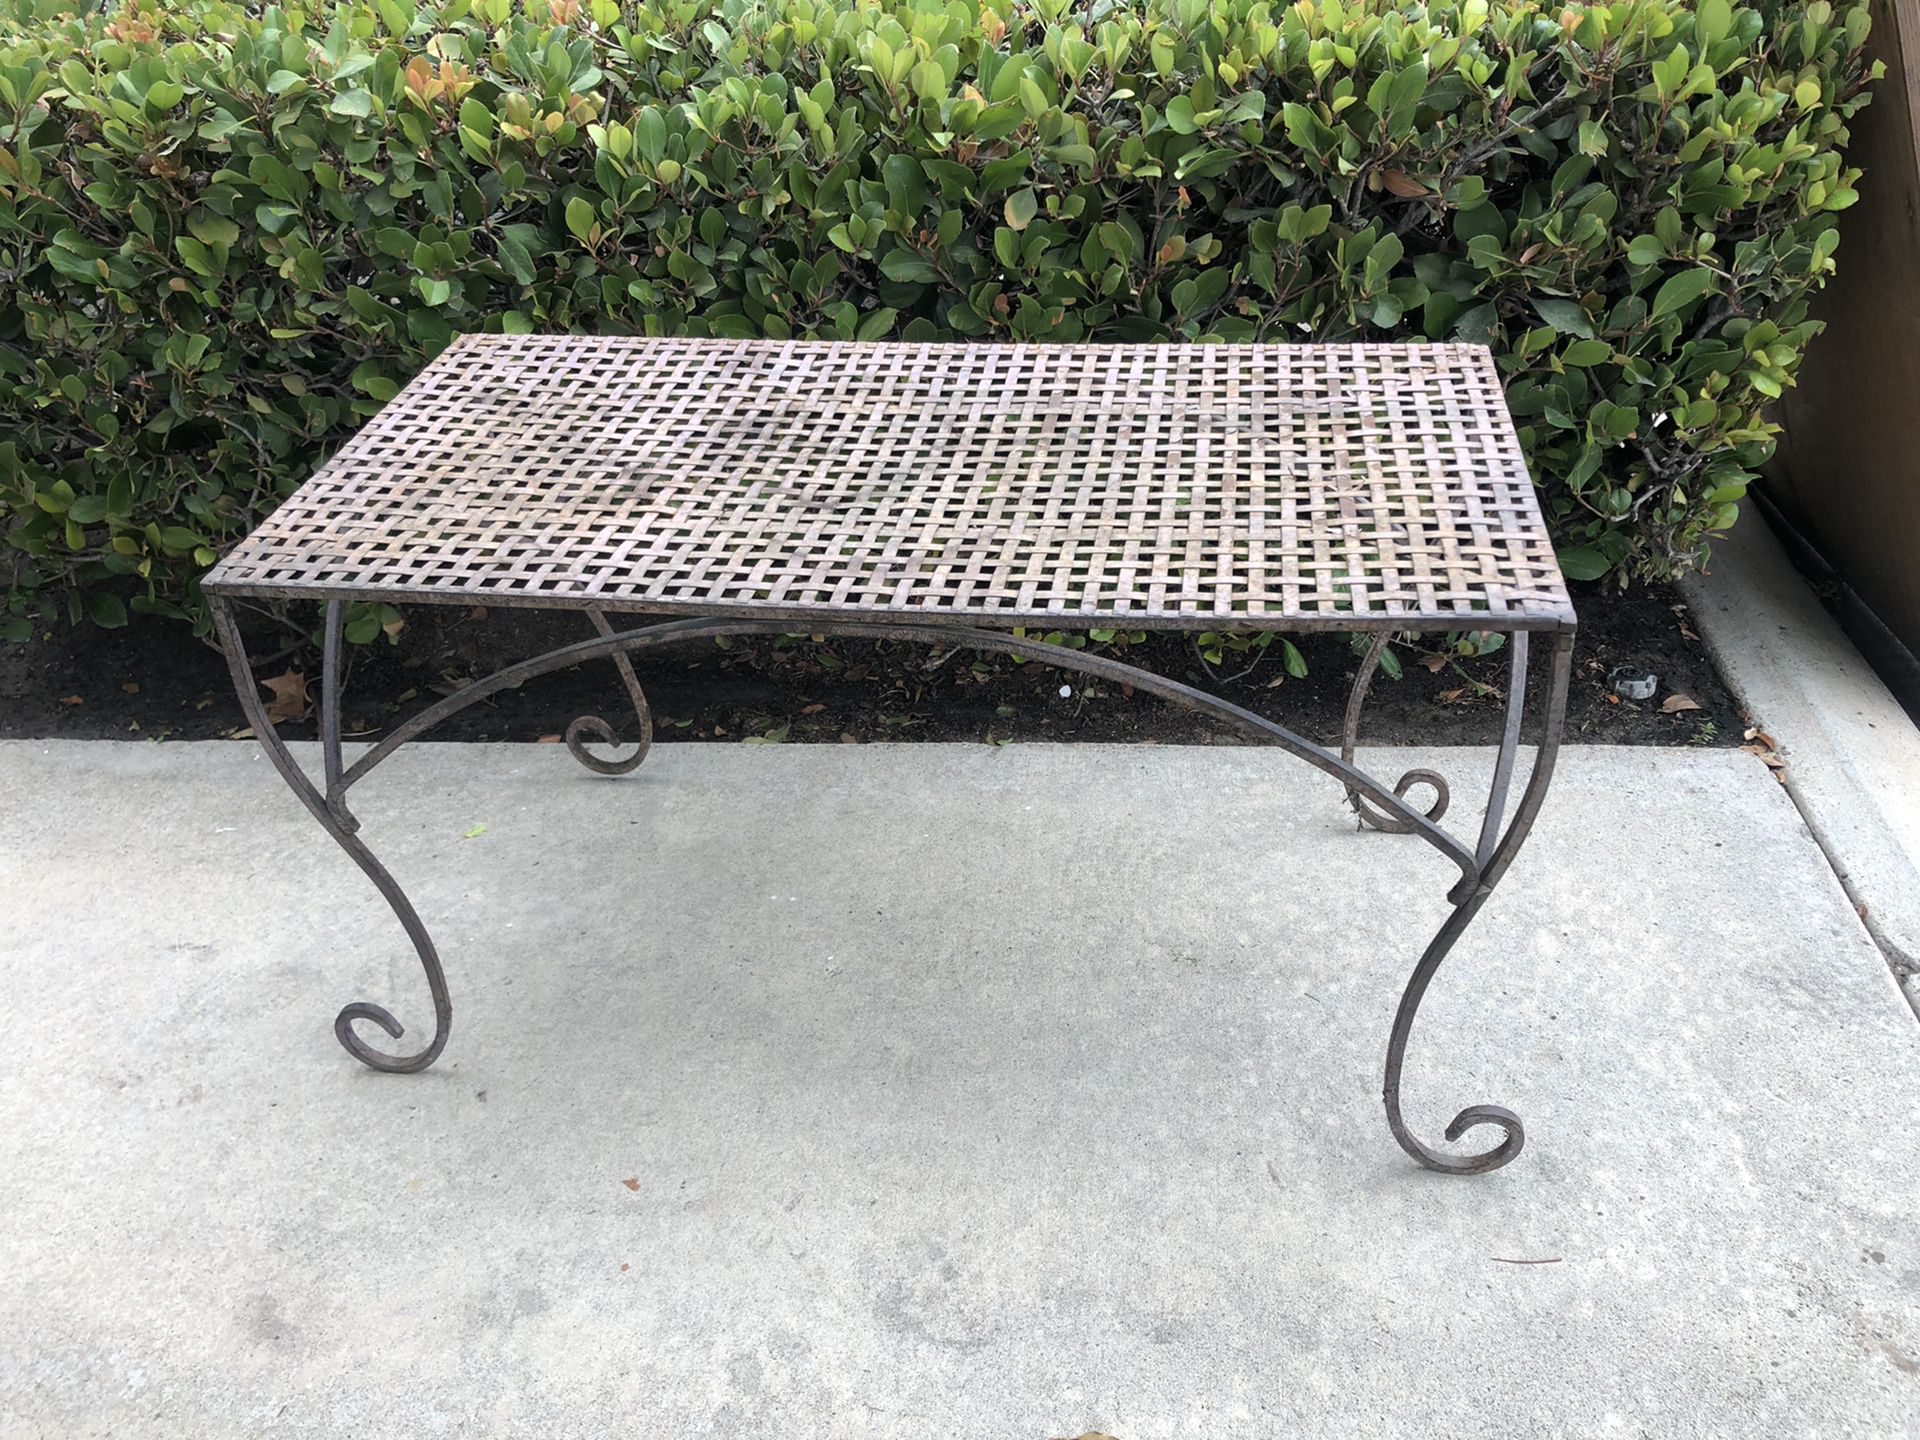 Vintage Rustic Woven Metal Table Great for Vintage Garden